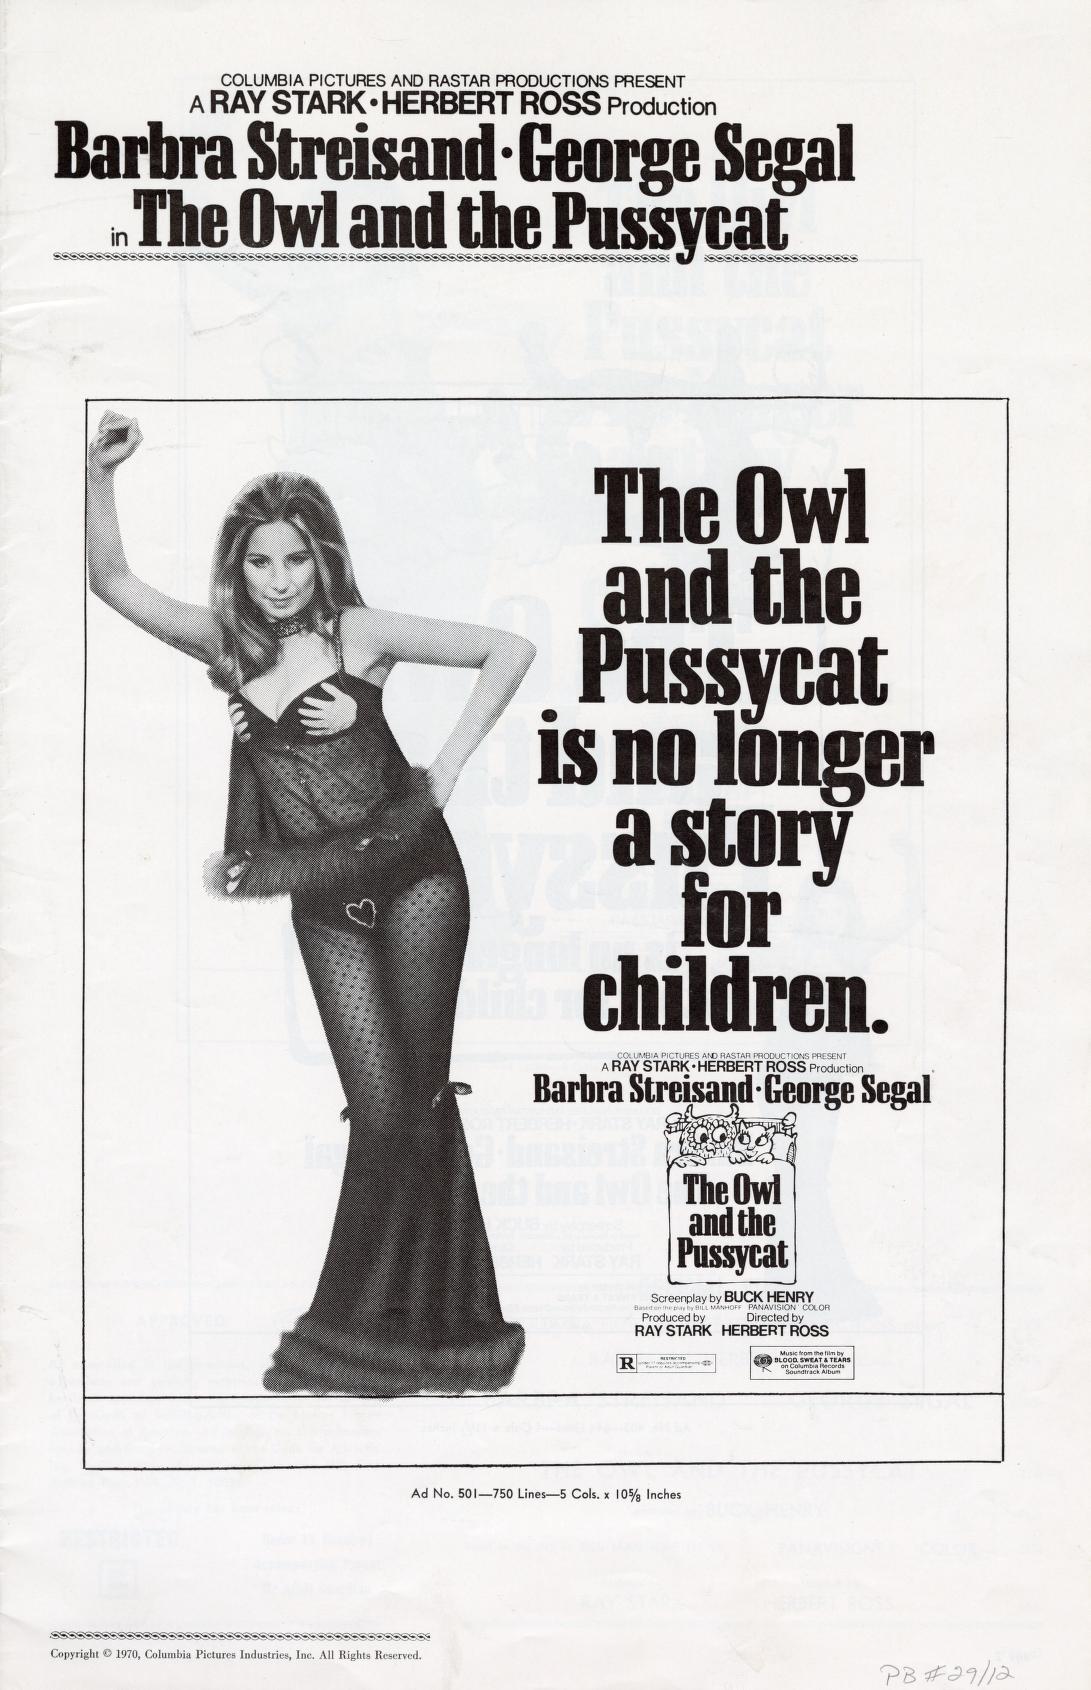 The Owl and the Pussycat (Columbia Pictures)